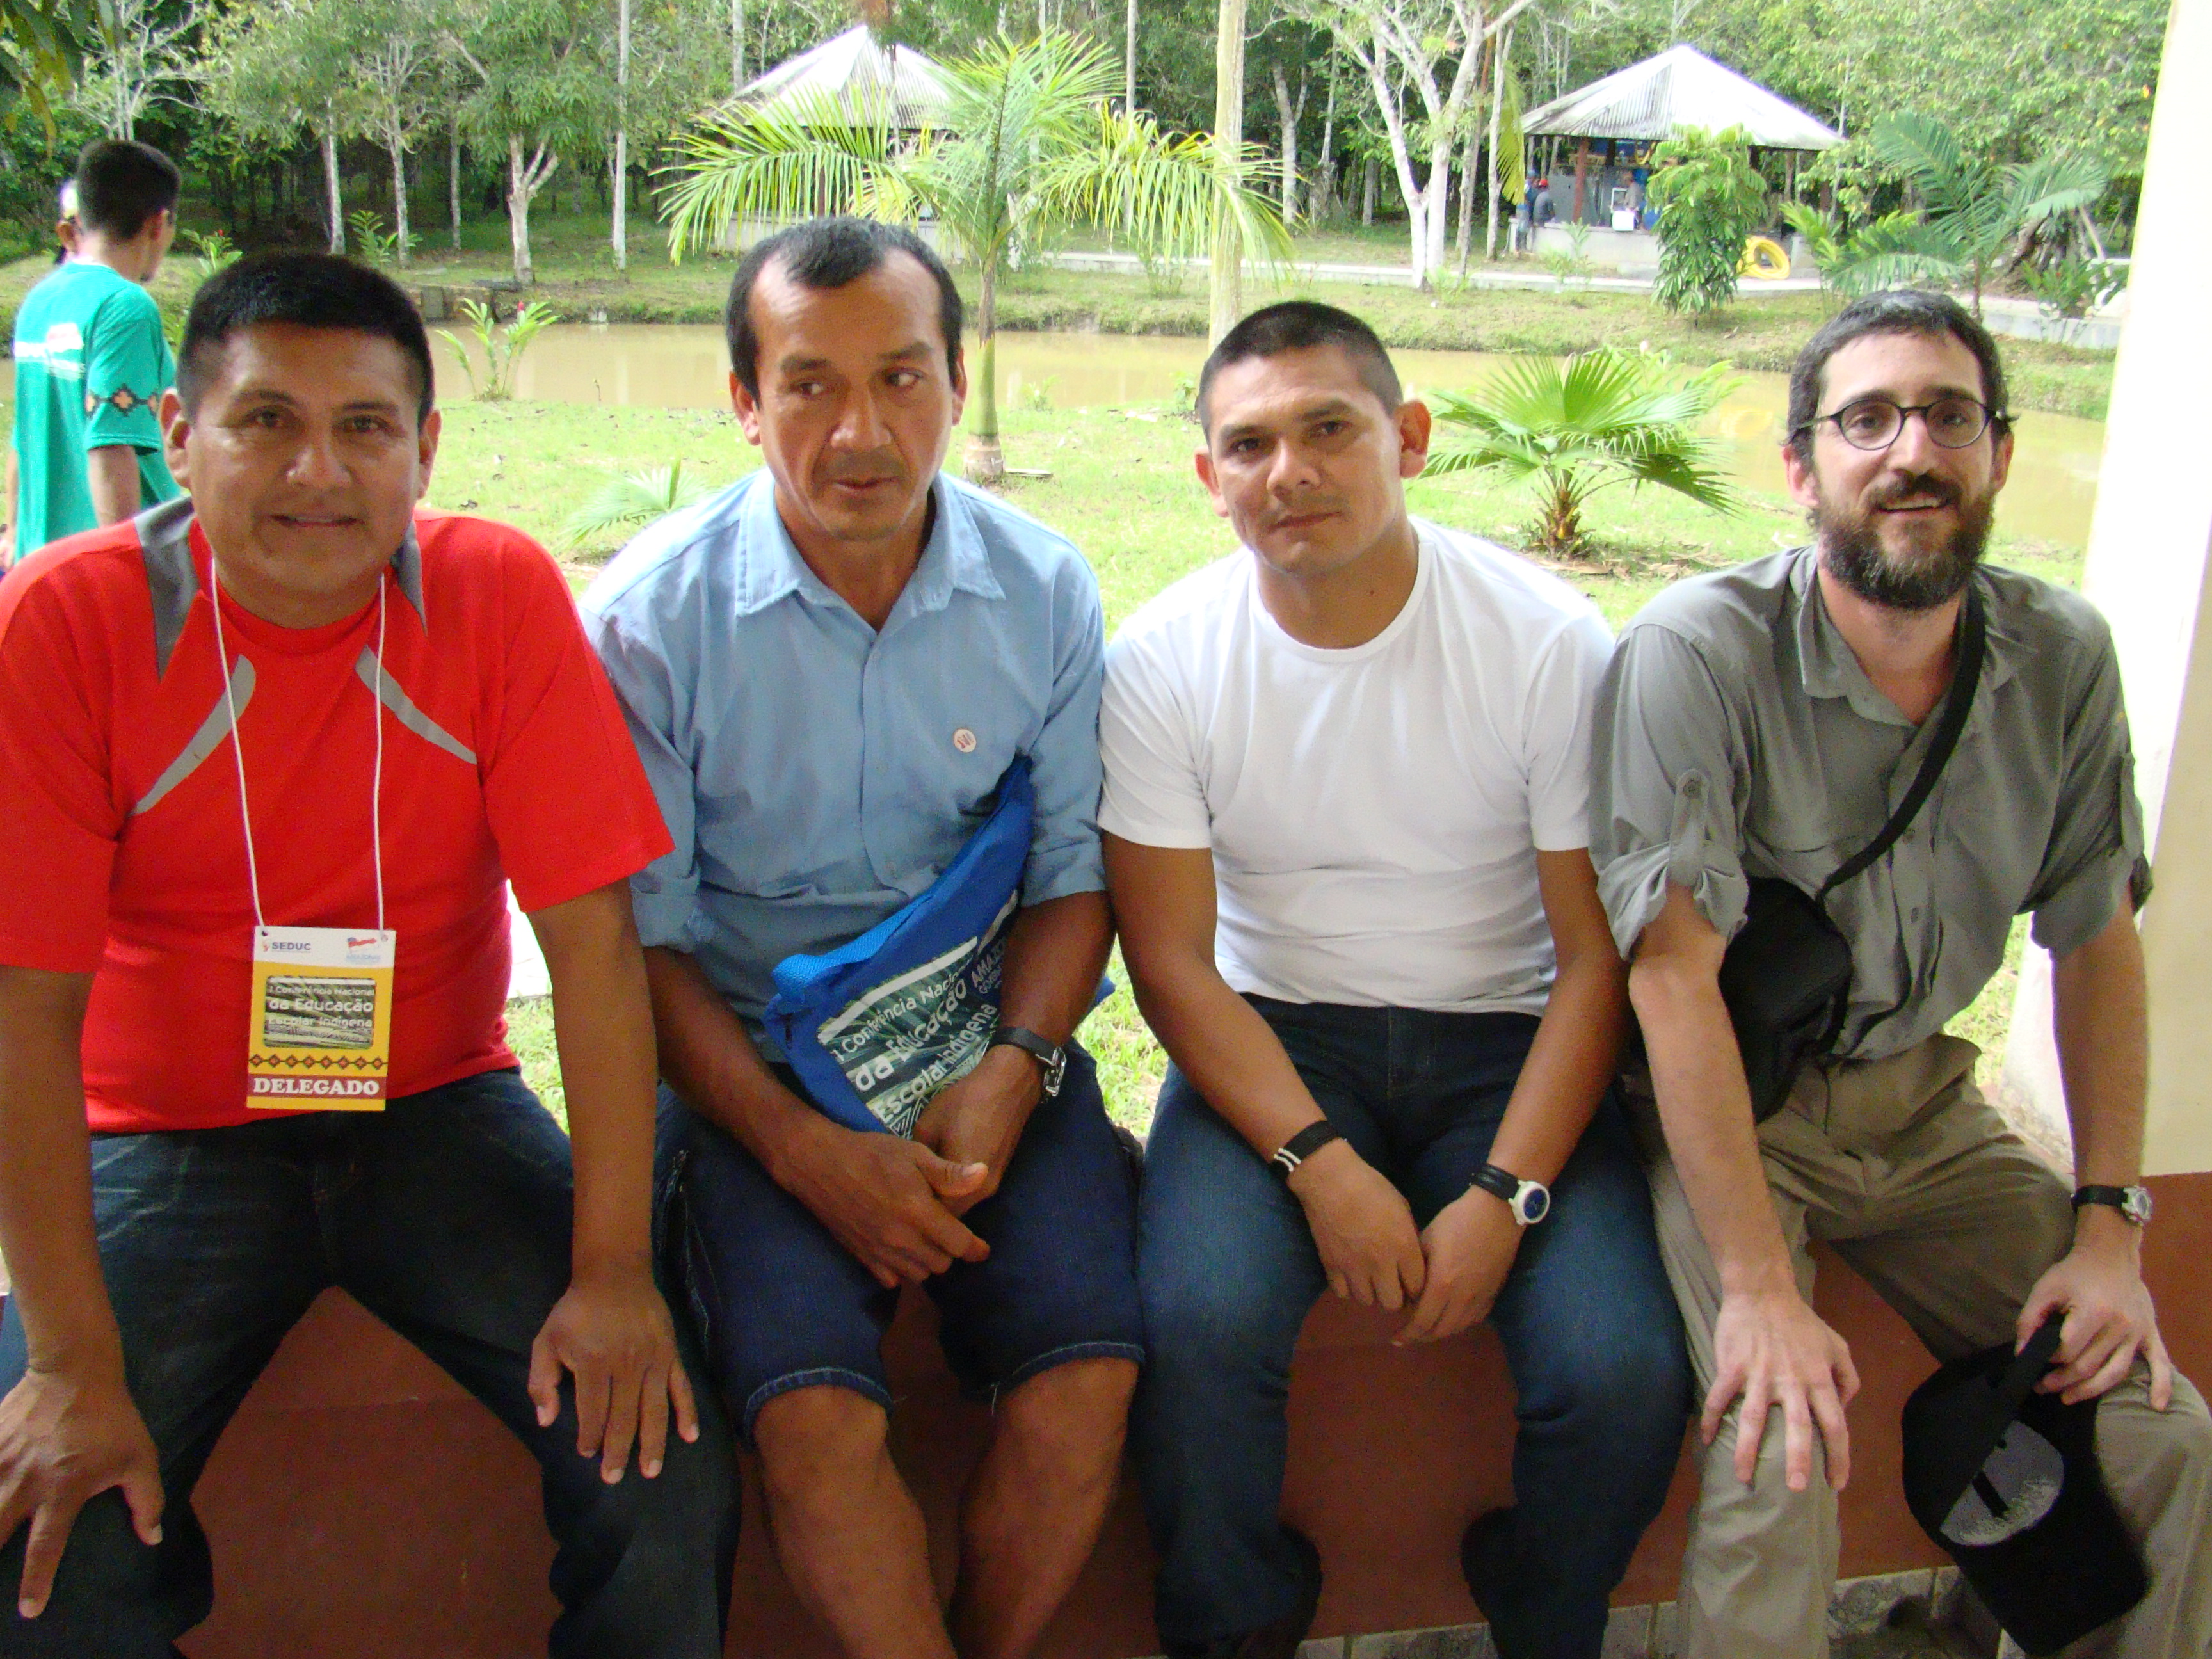 Clovis Rufino, Beto Marubo, and Manelao pose for a photograph with Javier Ruedas at a conference on education in Tabatinga in 2009.